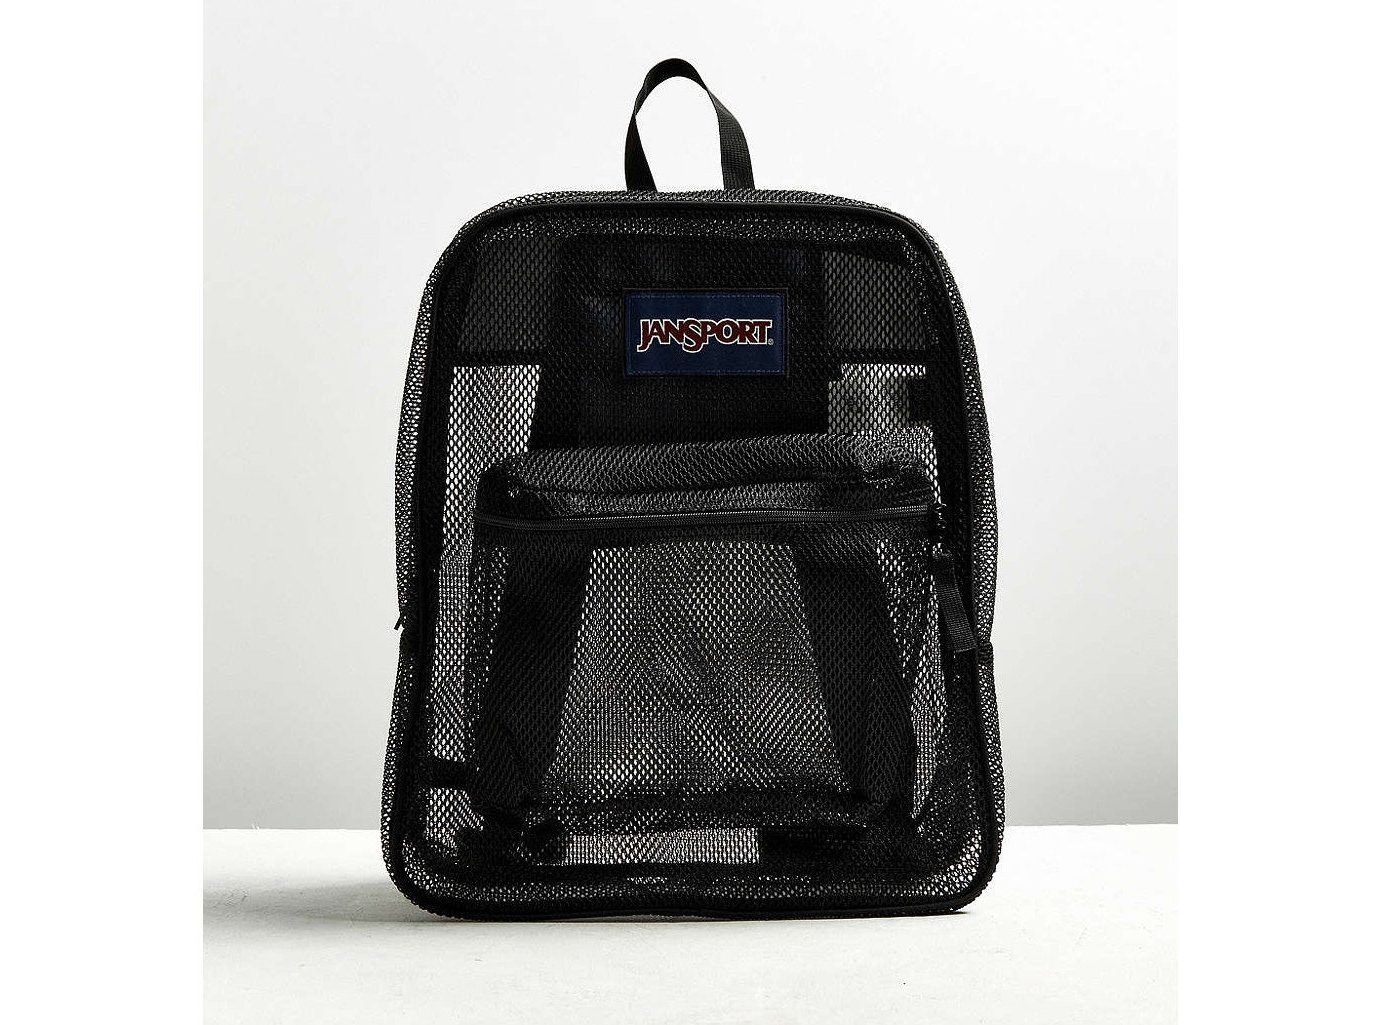 Style + Design accessory case bag indoor product black product design backpack